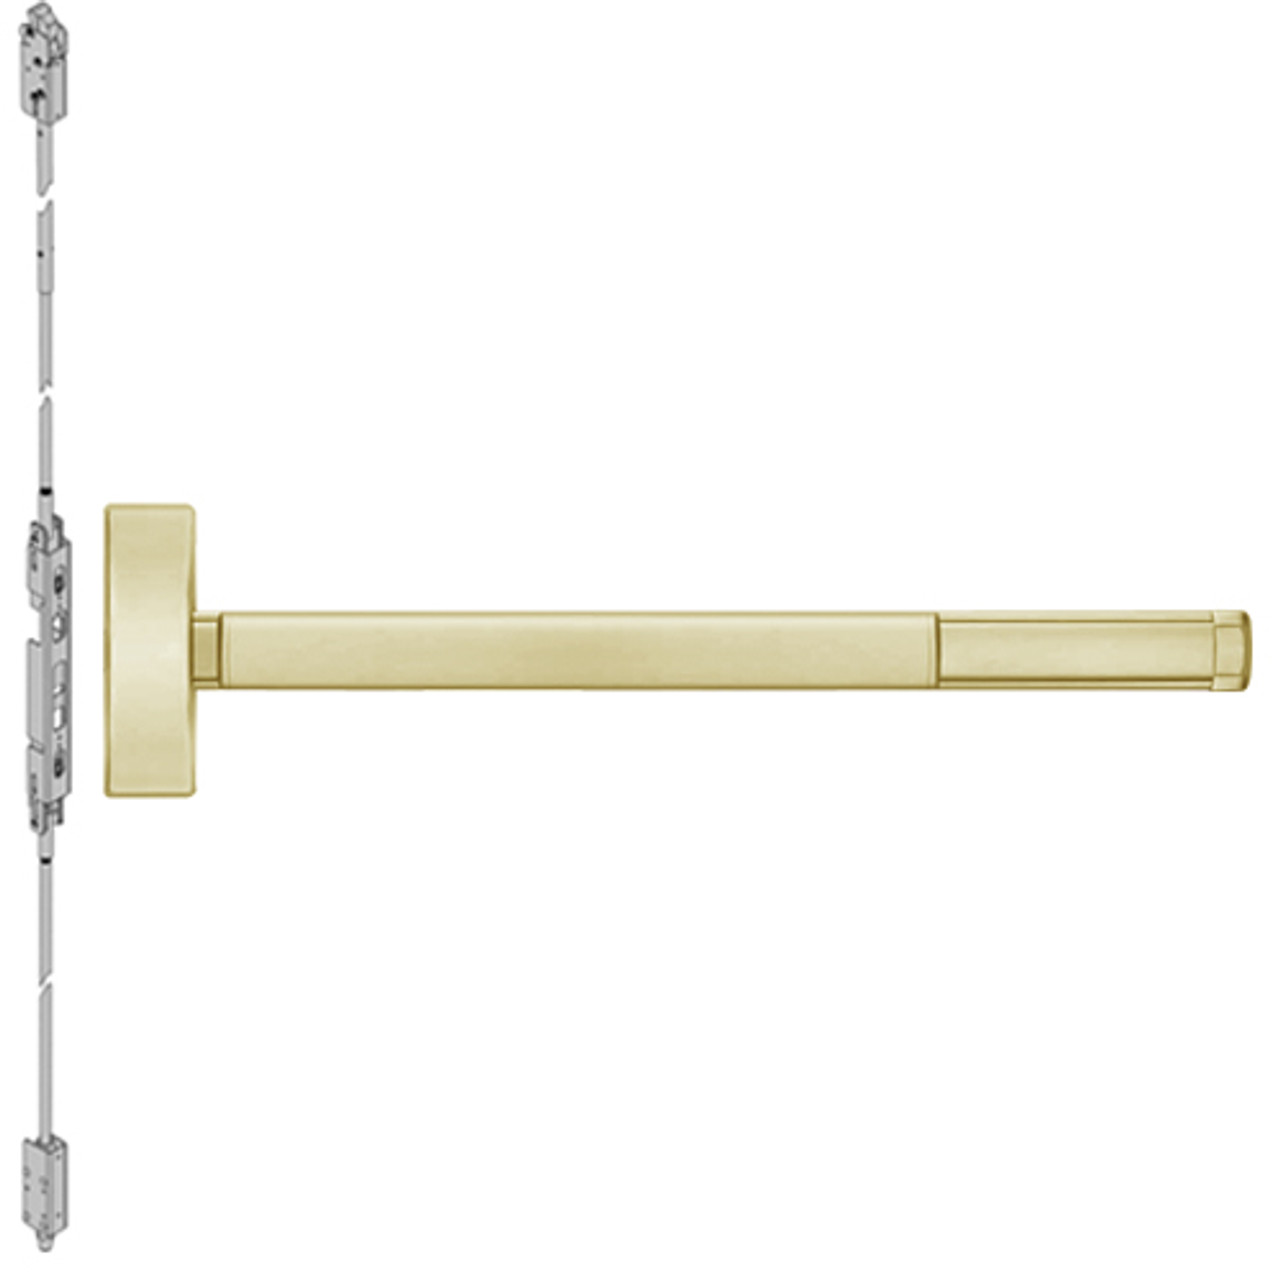 ELRFL2815-606-36 PHI 2800 Series Fire Rated Concealed Vertical Rod Exit Device with Electric Latch Retraction Prepped for Thumbpiece Always Active in Satin Brass Finish